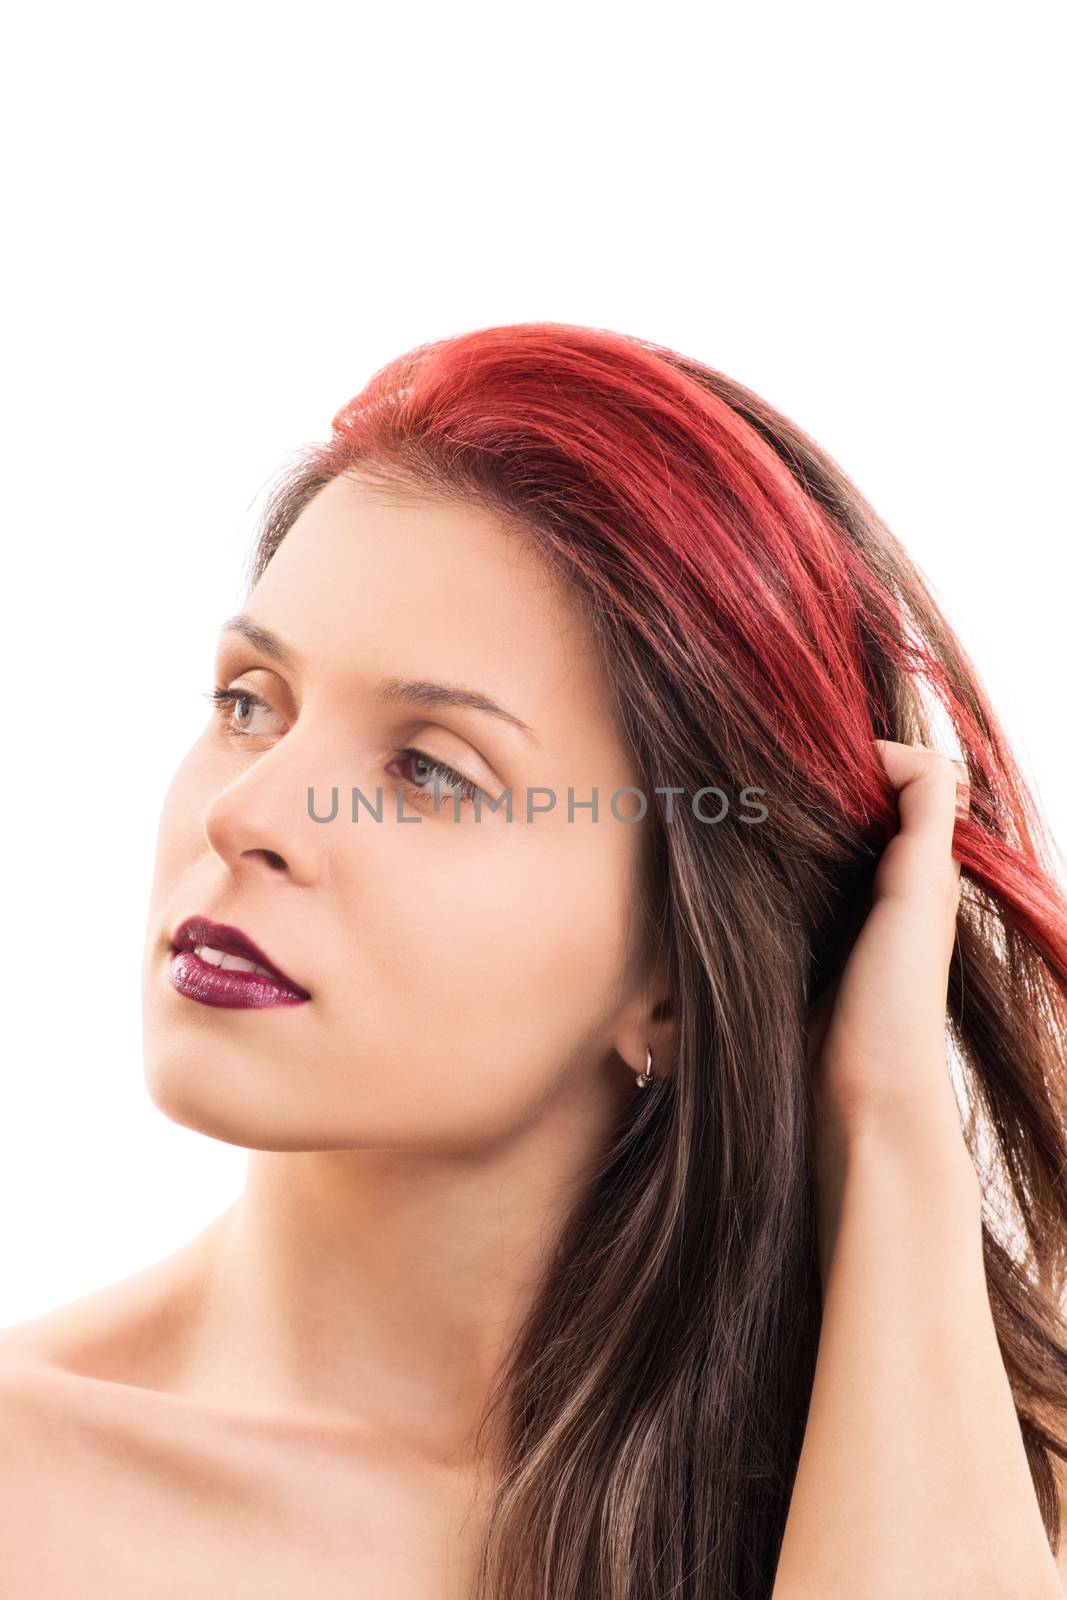 Sensual portrait of a beautiful young woman with soft clean make up, going through her hair with her hand, isolated on white background.